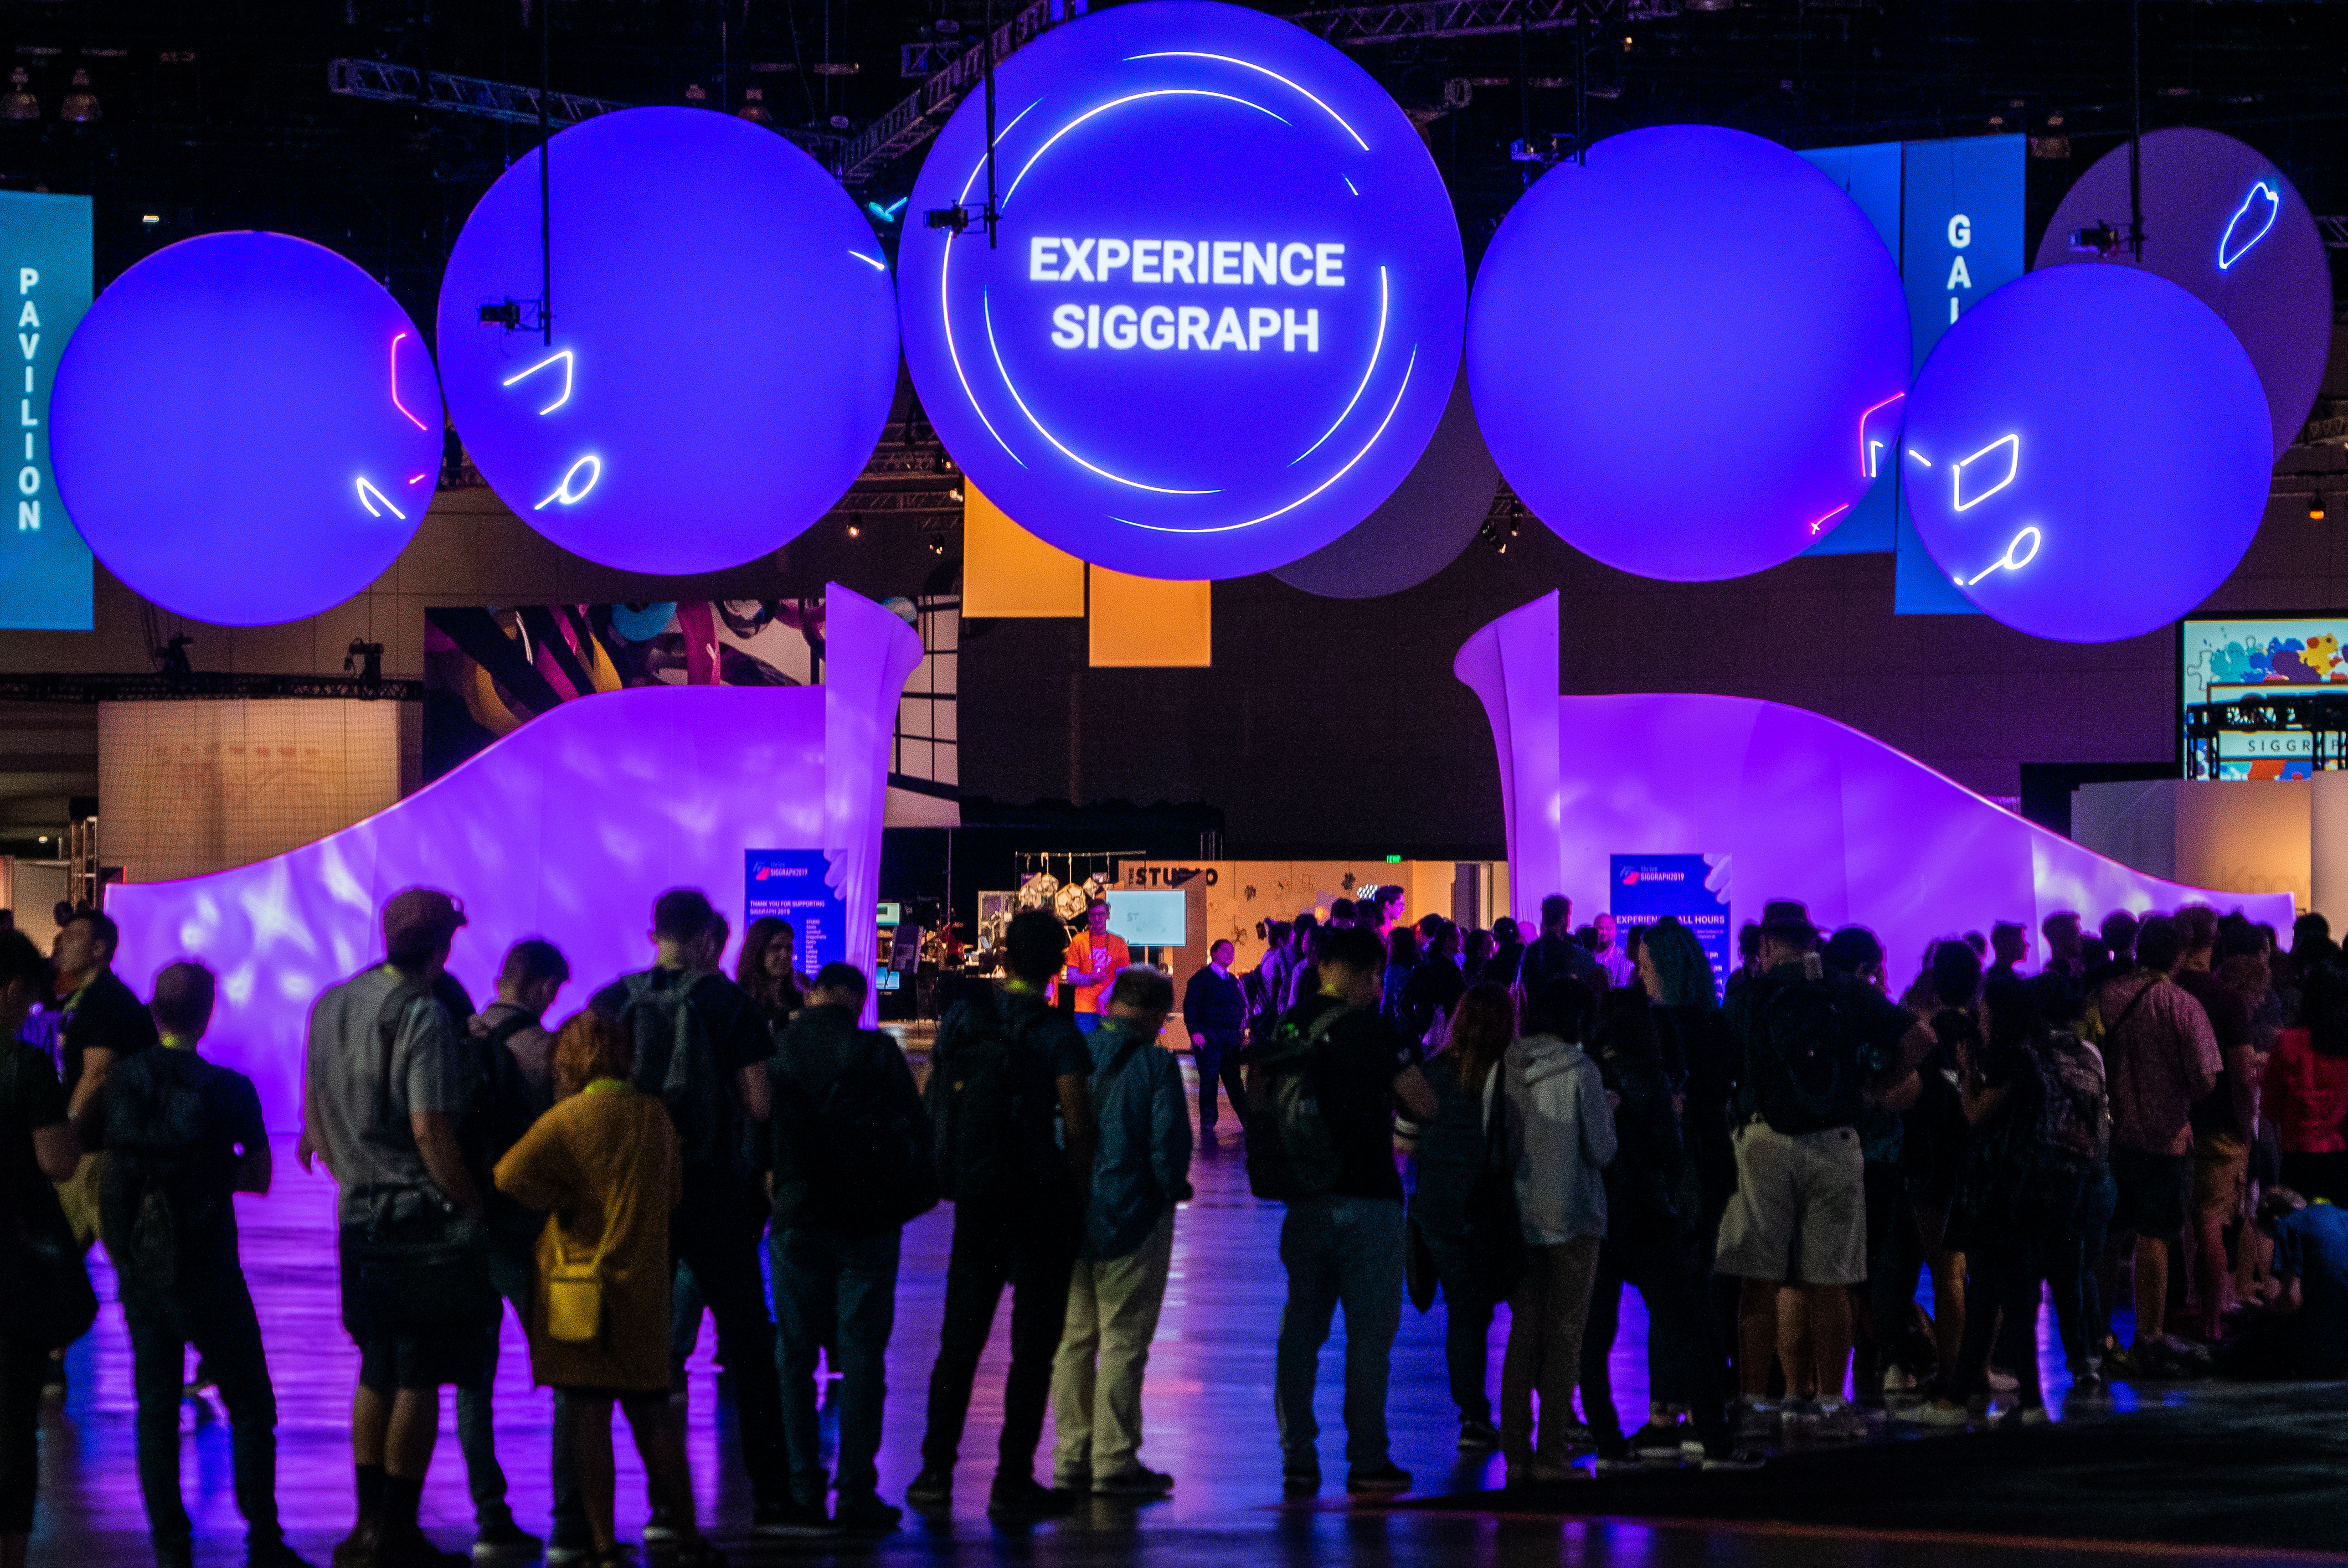 Experience SIGGRAPH: Photo of SIGGRAPH 2019 Experience Hall by Jim Hagarty.